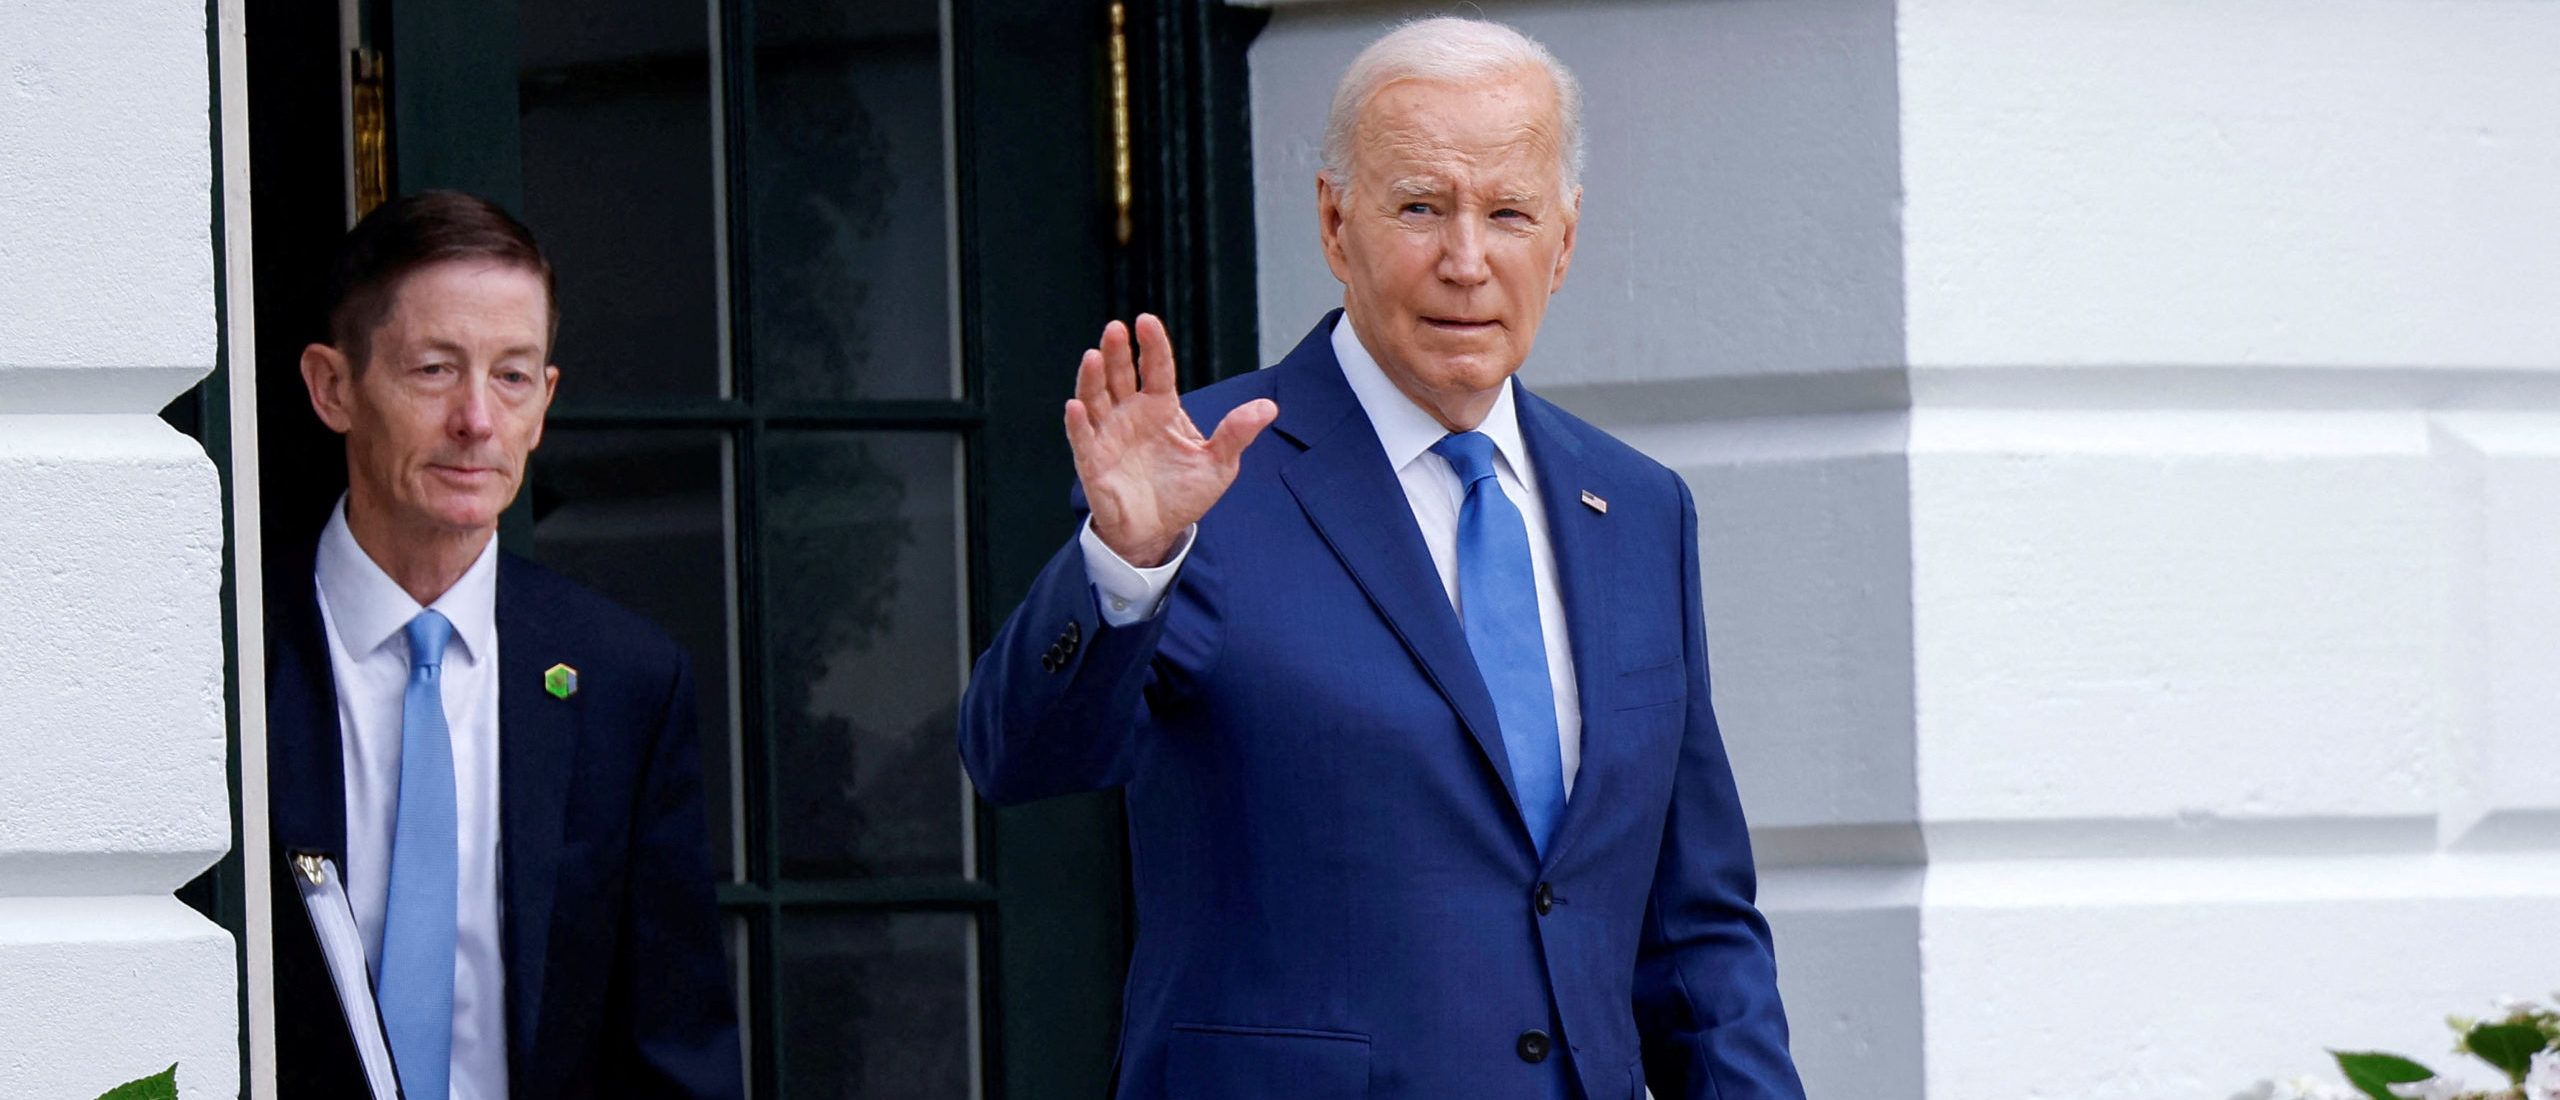  Biden Team Reportedly In Denial About President Getting Trounced In Polls By Trump 